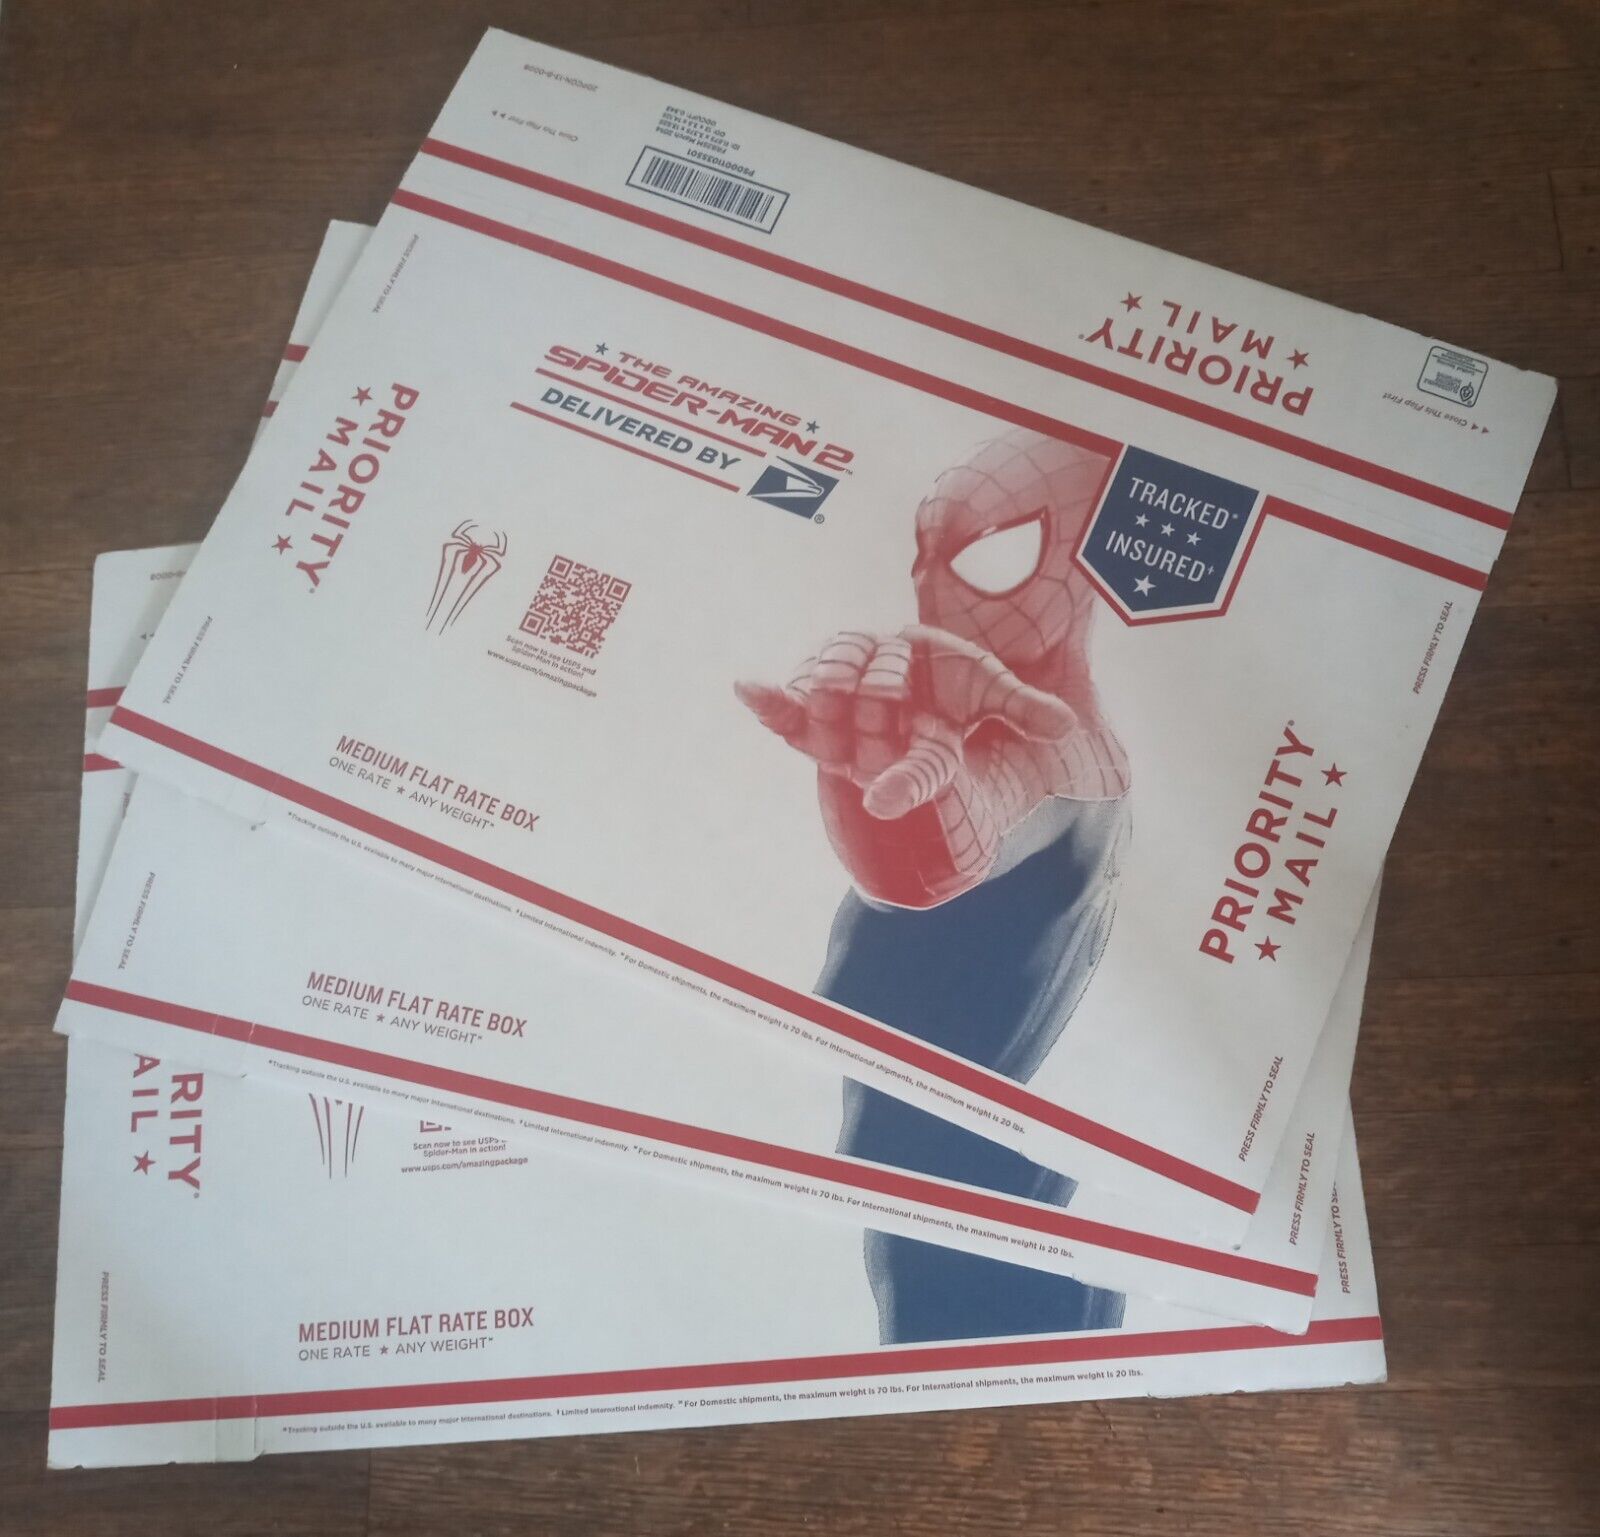 Lot Of 3 USPS Amazing Spider-Man 2 US Postal Service Priority Mail Boxes 2014